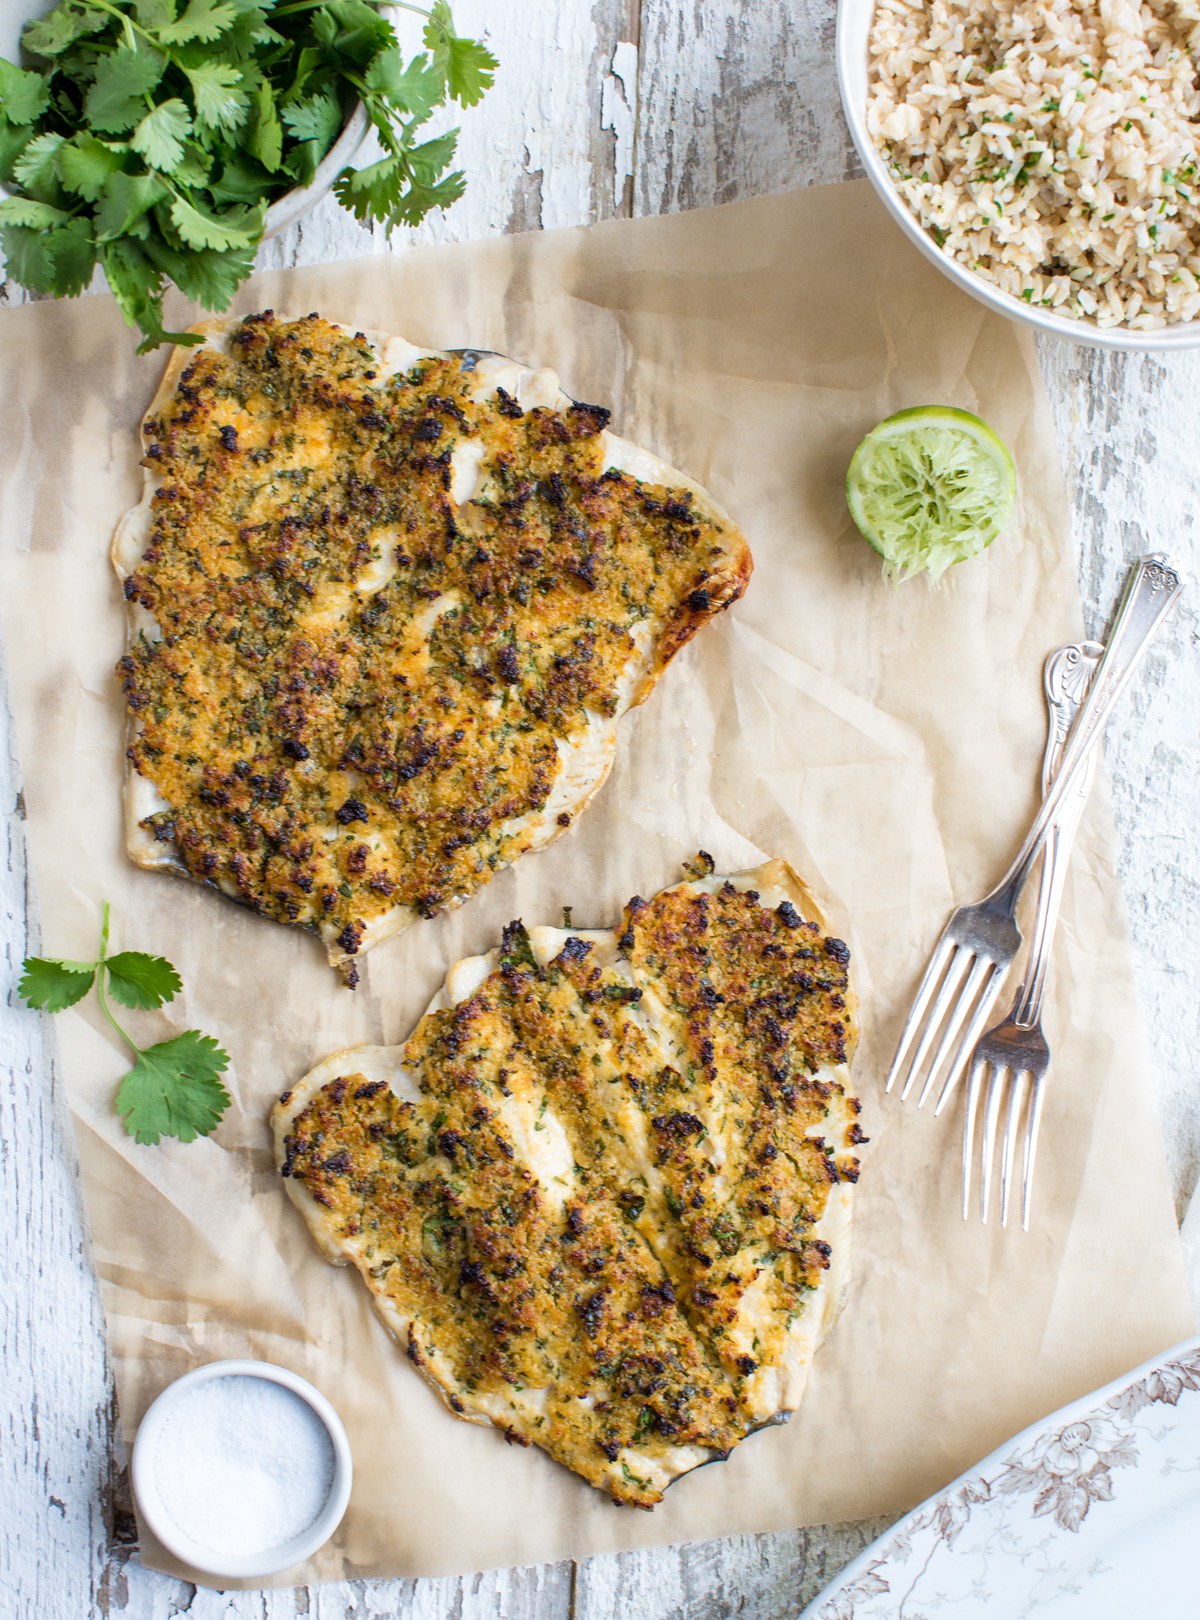 Cooked Almond Crusted Trout